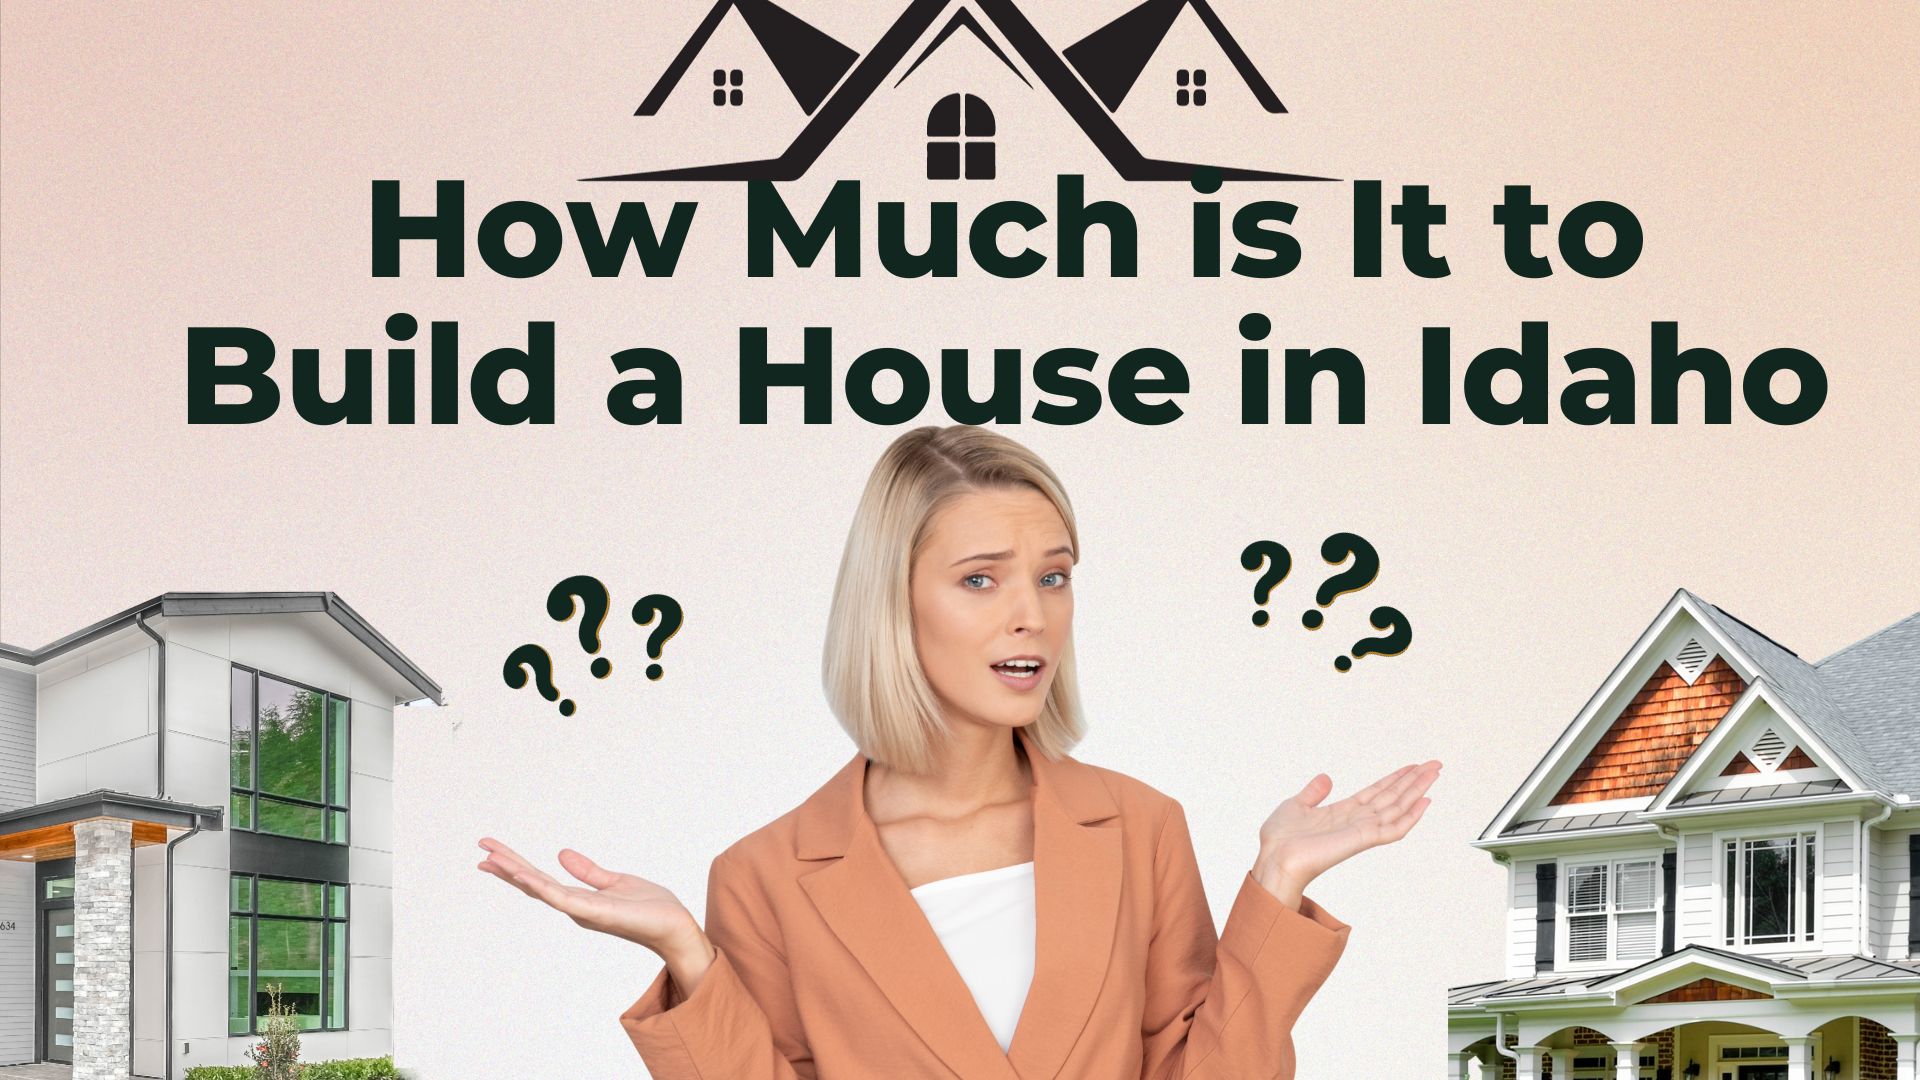 How Much is It to Build a House in Idaho